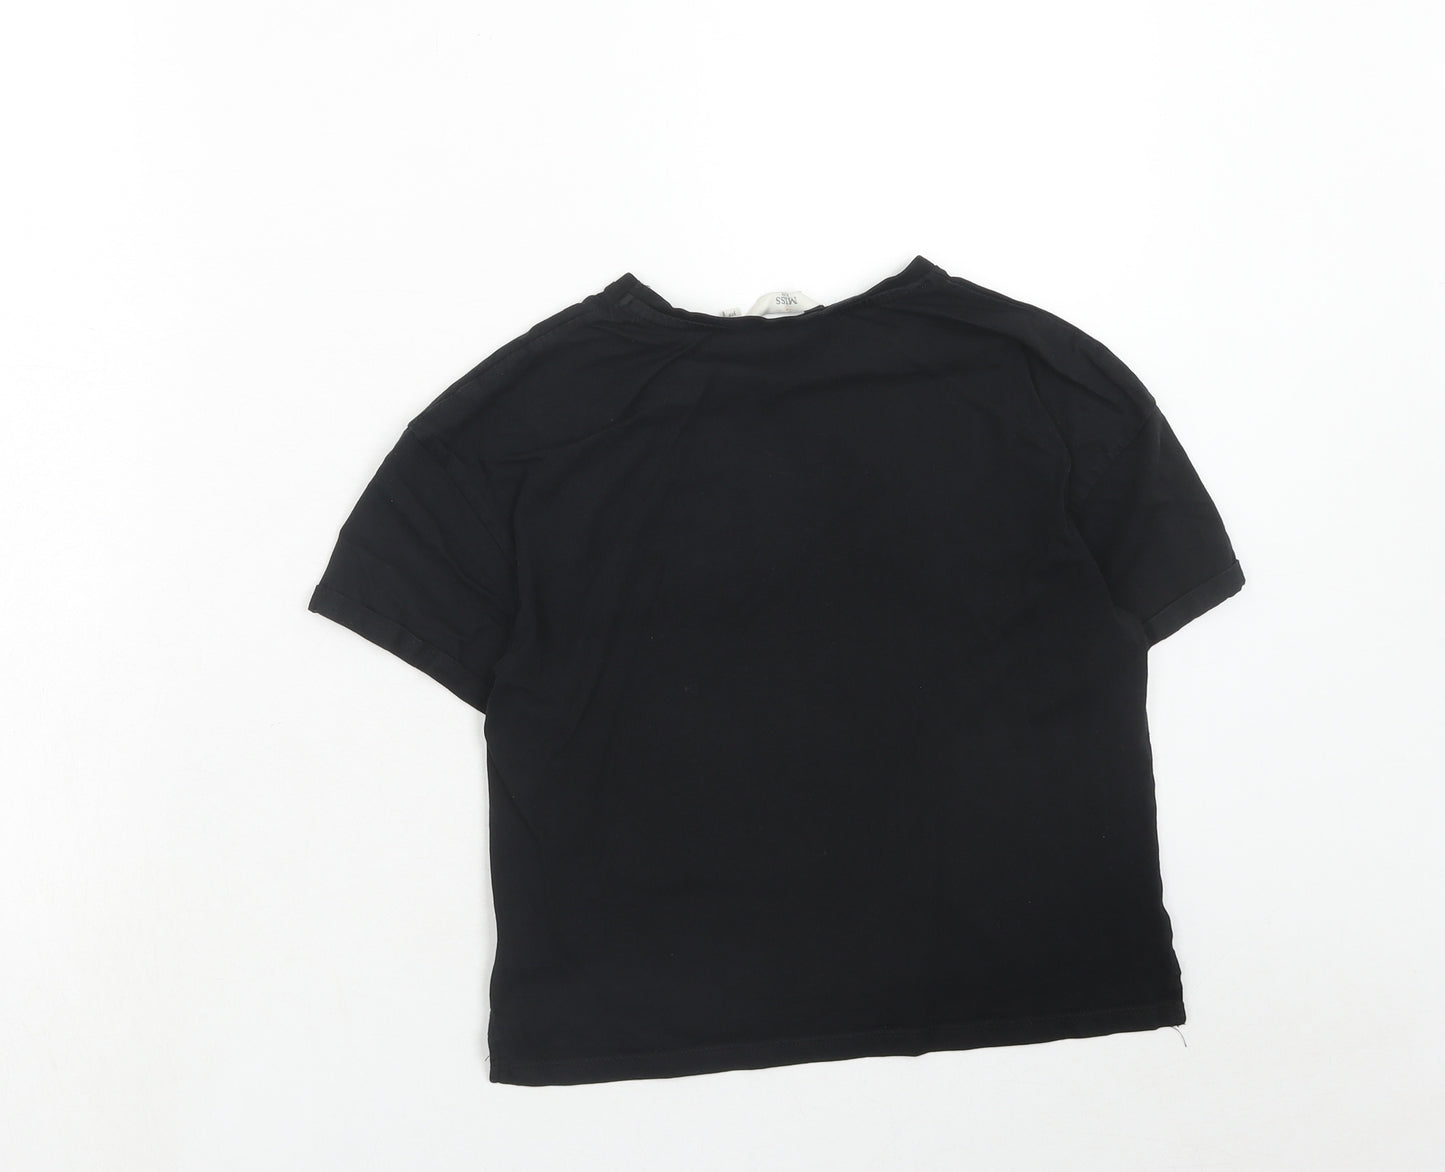 Peacocks Girls Black Cotton Basic T-Shirt Size 9-10 Years Round Neck Pullover - Good Vibes